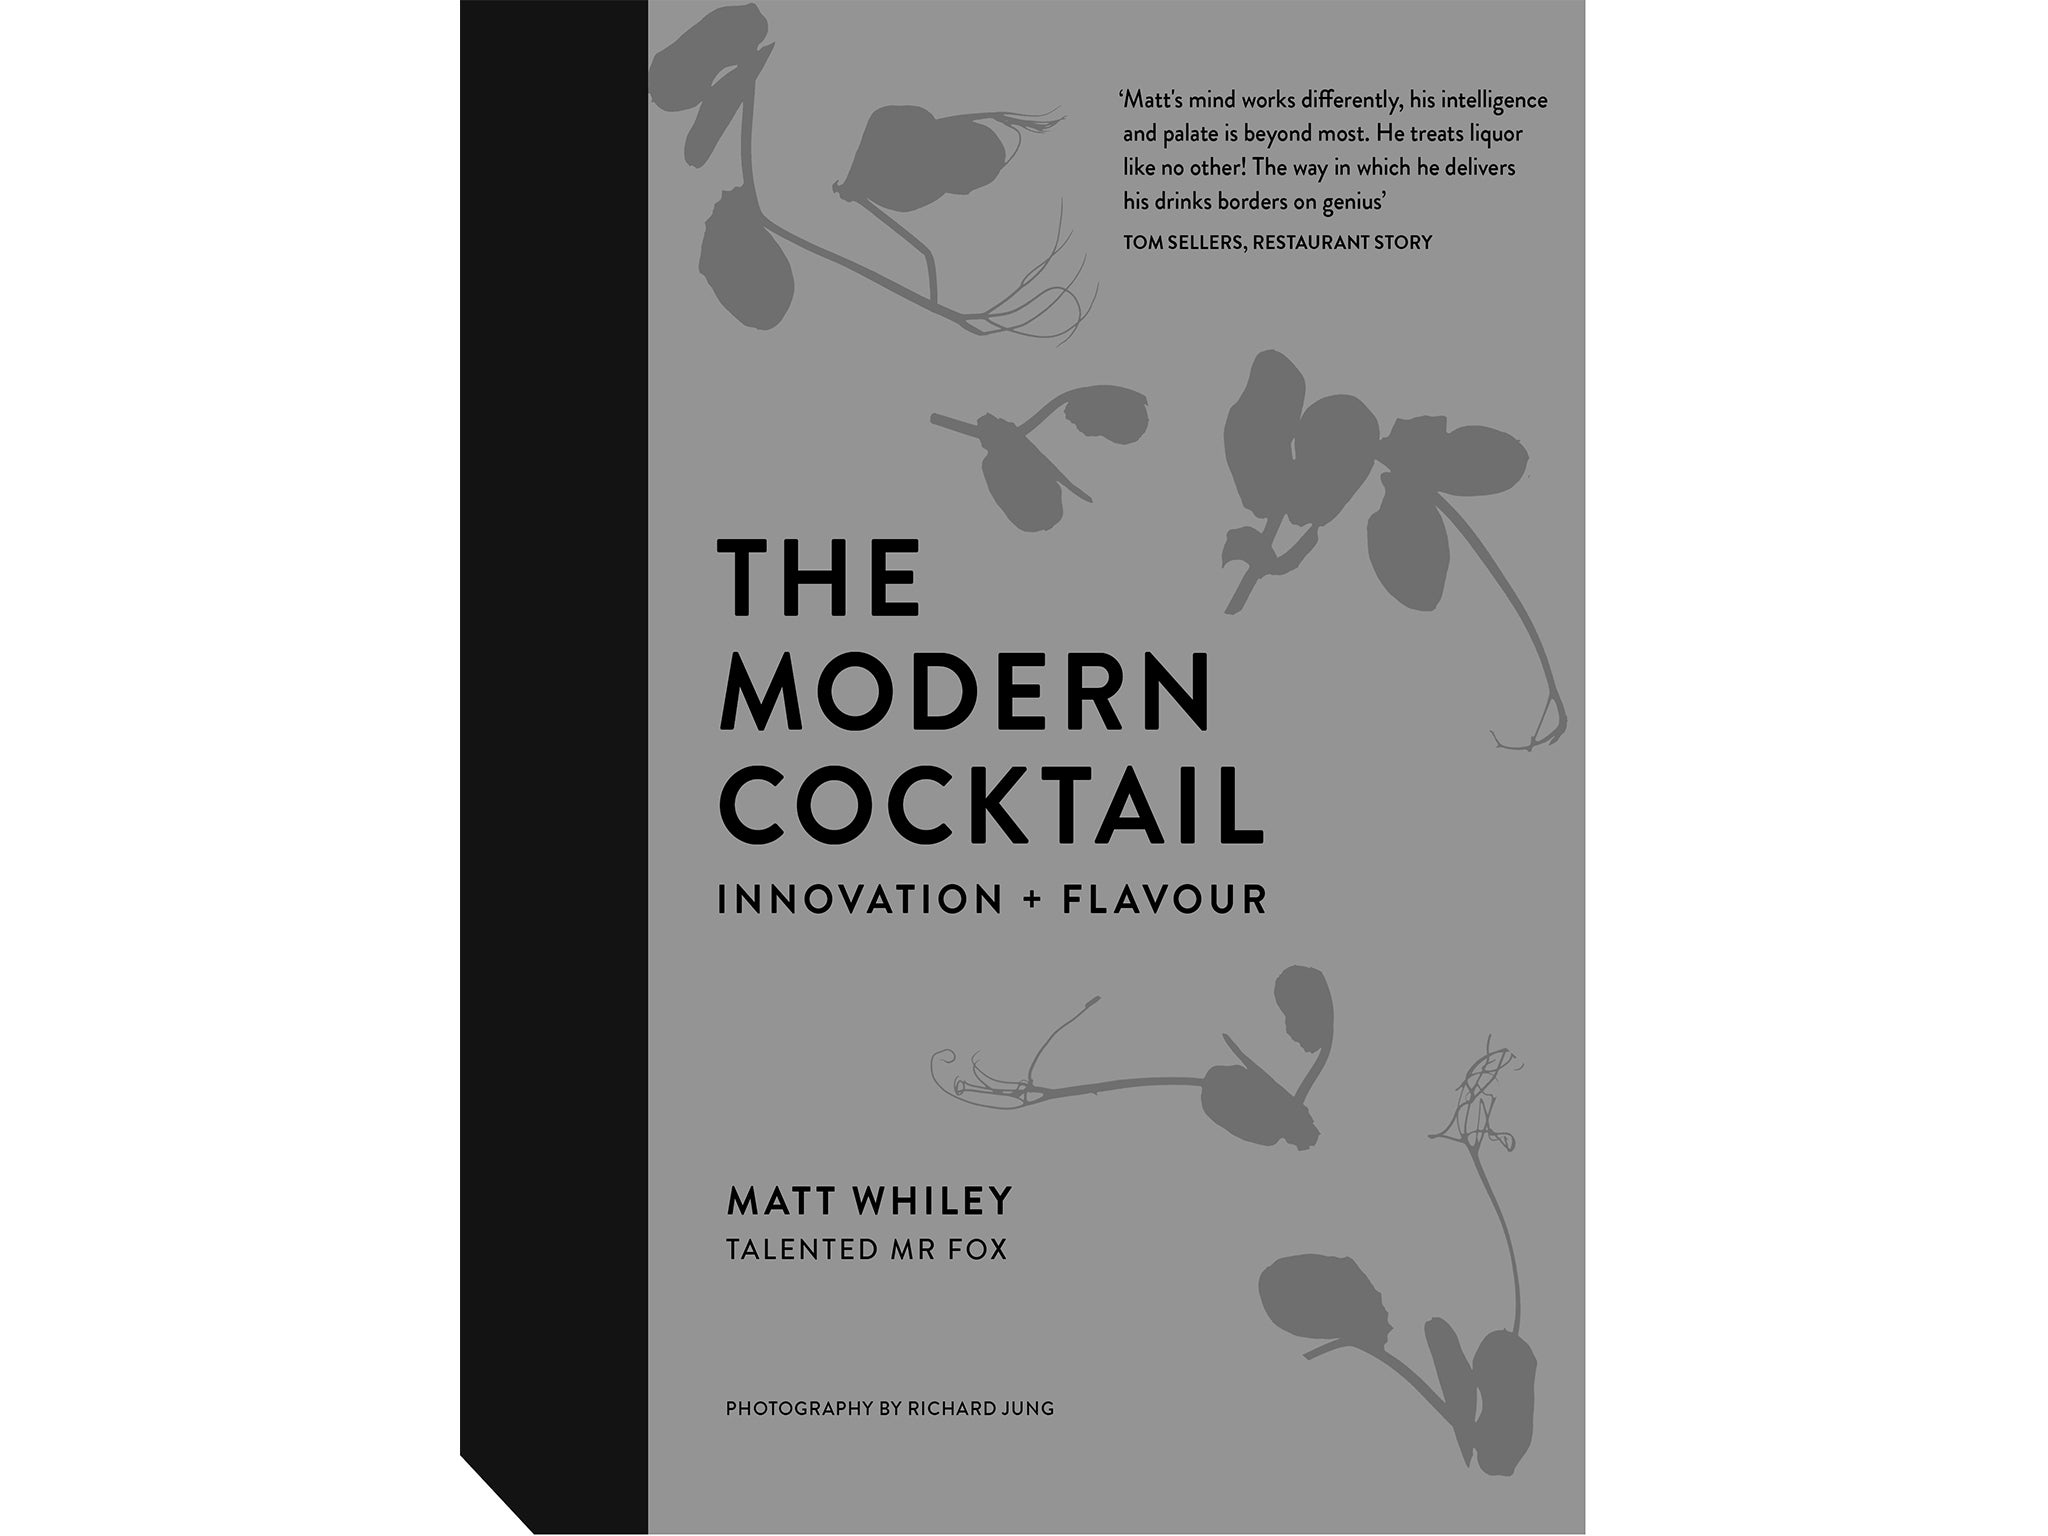 For guidance, inspiration, tips and technique, this cocktail recipe book is a must-have